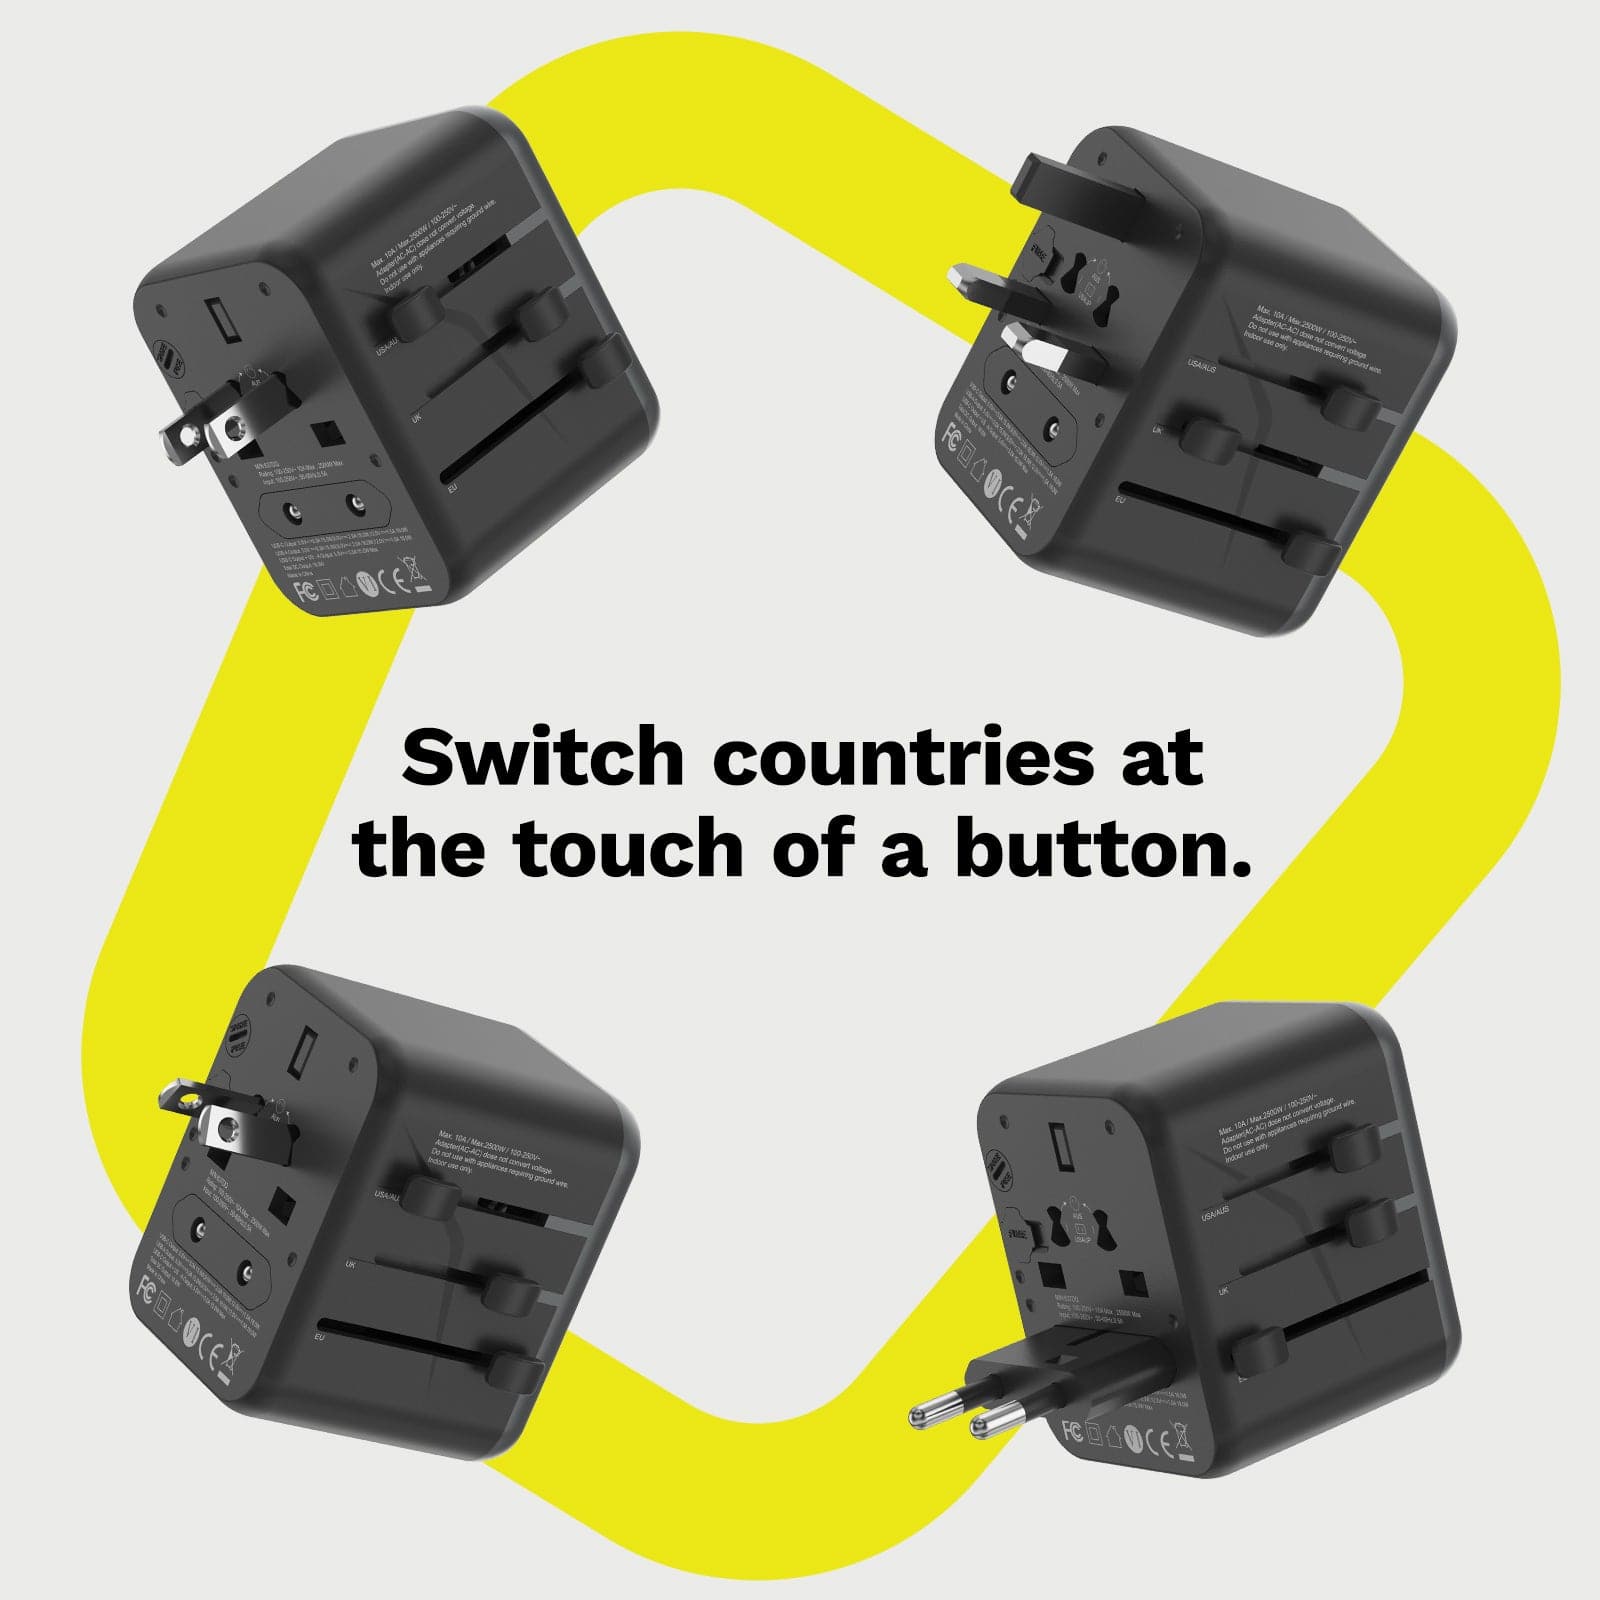 SWITCH COUNTRIES AT THE TOUCH OF A BUTTON